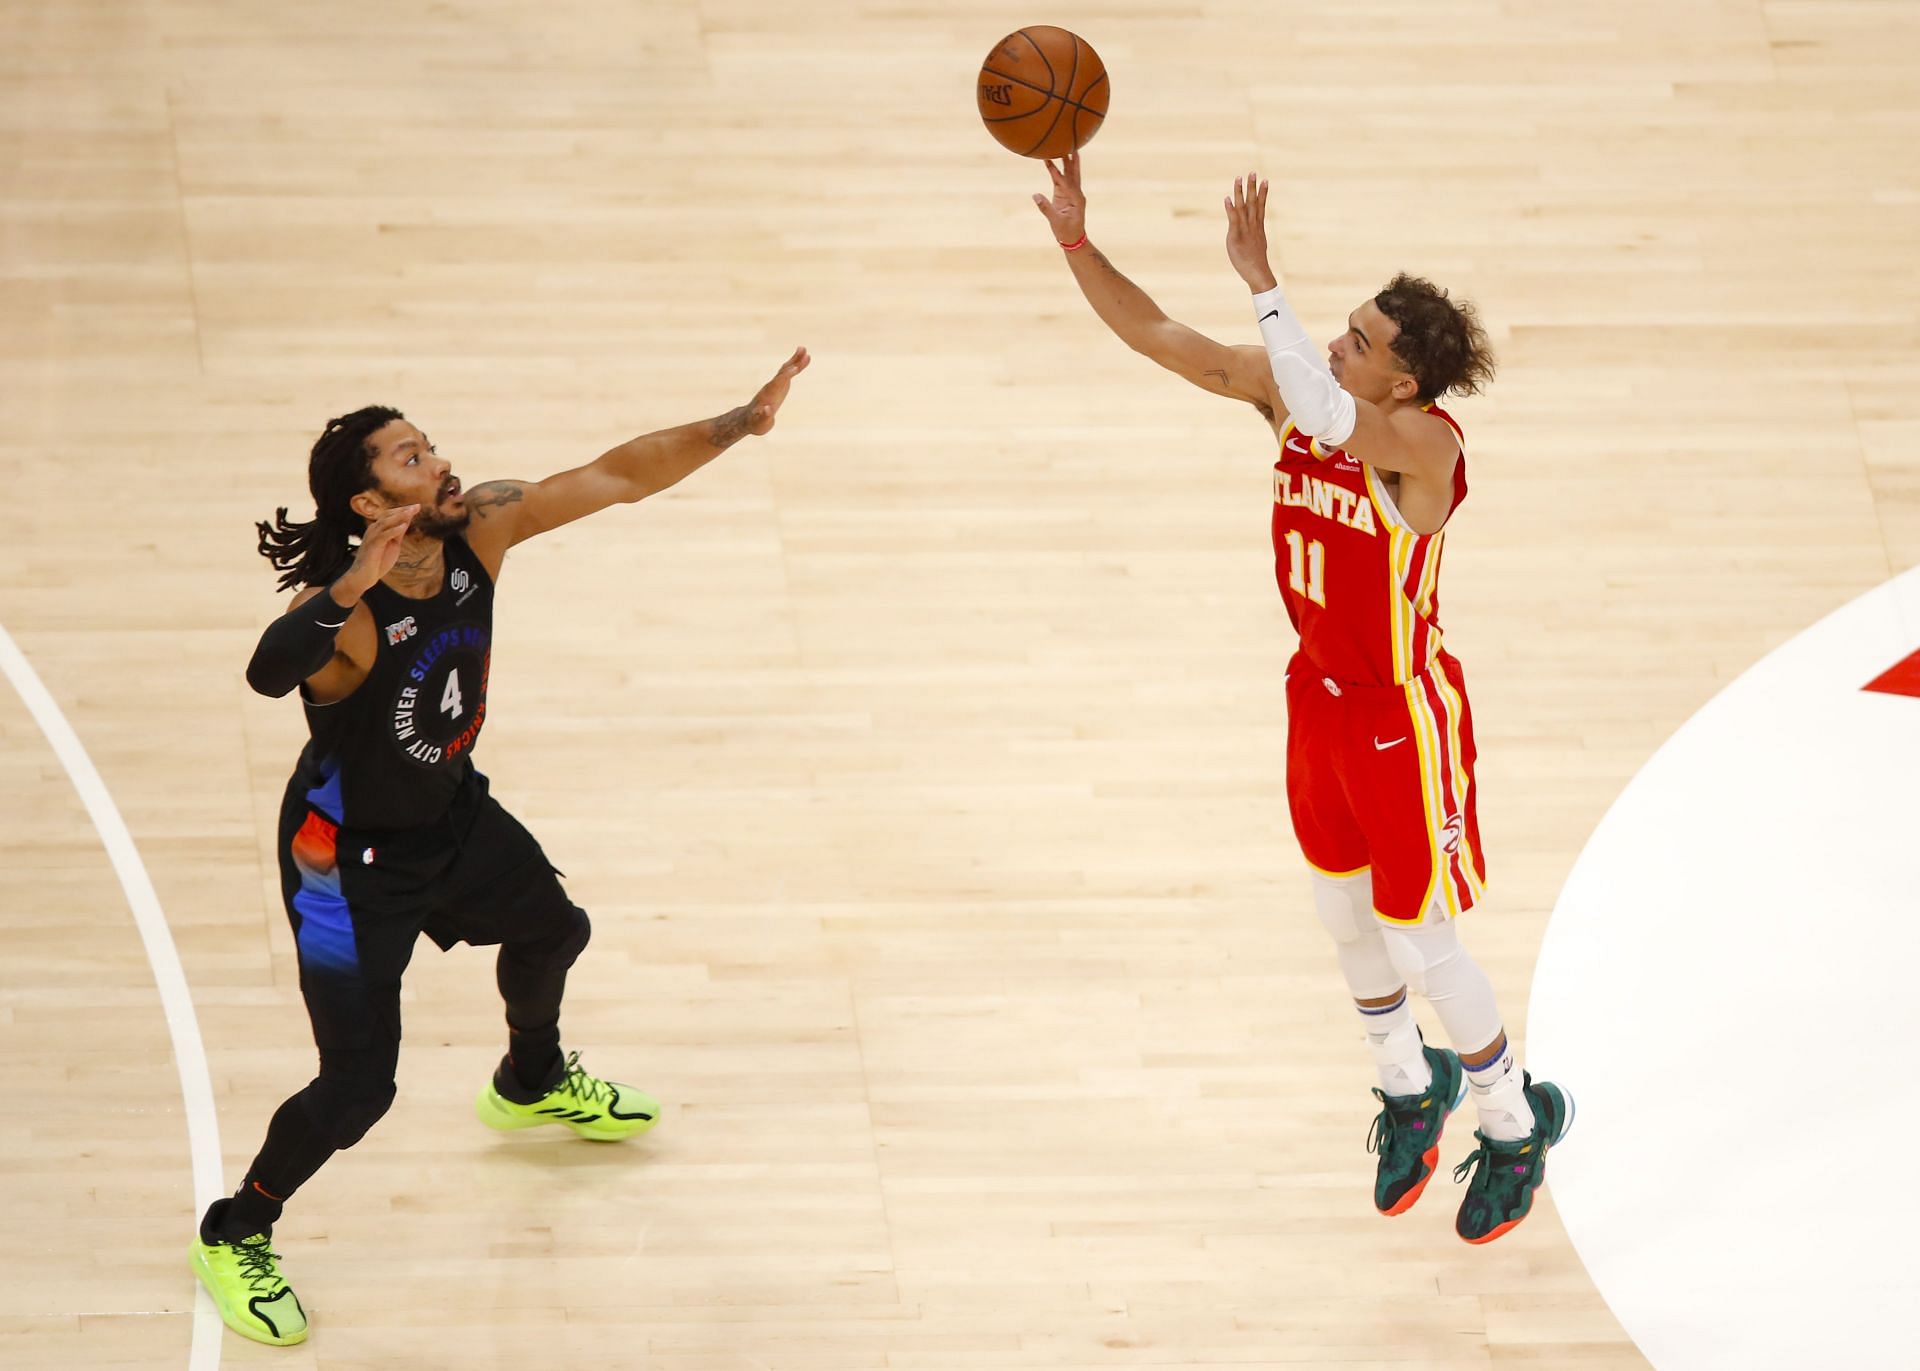 Trae Young #11 of the Atlanta Hawks shoots as Derrick Rose #4 of the New York Knicks defends in the first half during game three of the Eastern Conference Quarterfinals at State Farm Arena on May 28, 2021 in Atlanta, Georgia.